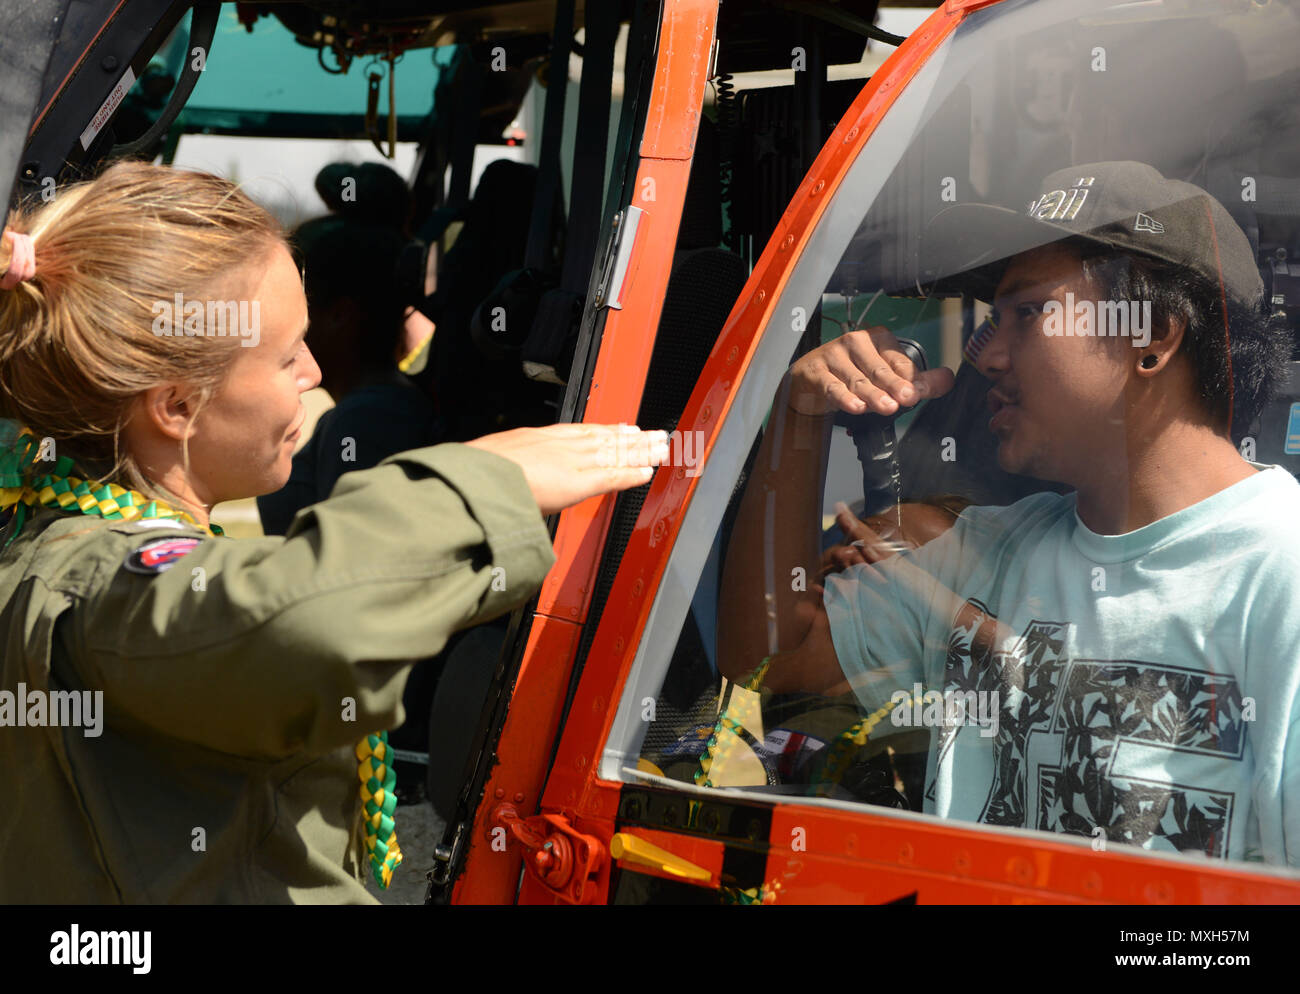 Lt. Lisa Davis, an MH-65 Dolphin helicopter pilot at Coast Guard Air Station Barbers Point, Oahu, speaks with a teenager about flying during a career day at Lanai High and Elementary School in Lanai, Nov. 2, 2016. Several crewmembers from Air Station Barbers Point flew from Oahu to speak with the children about possible career opportunities in the Coast Guard and aviation as well as providing an up close look at an MH-65 Dolphin helicopter. (U.S. Coast Guard photo by Petty Officer 2nd Class Tara Molle) Stock Photo